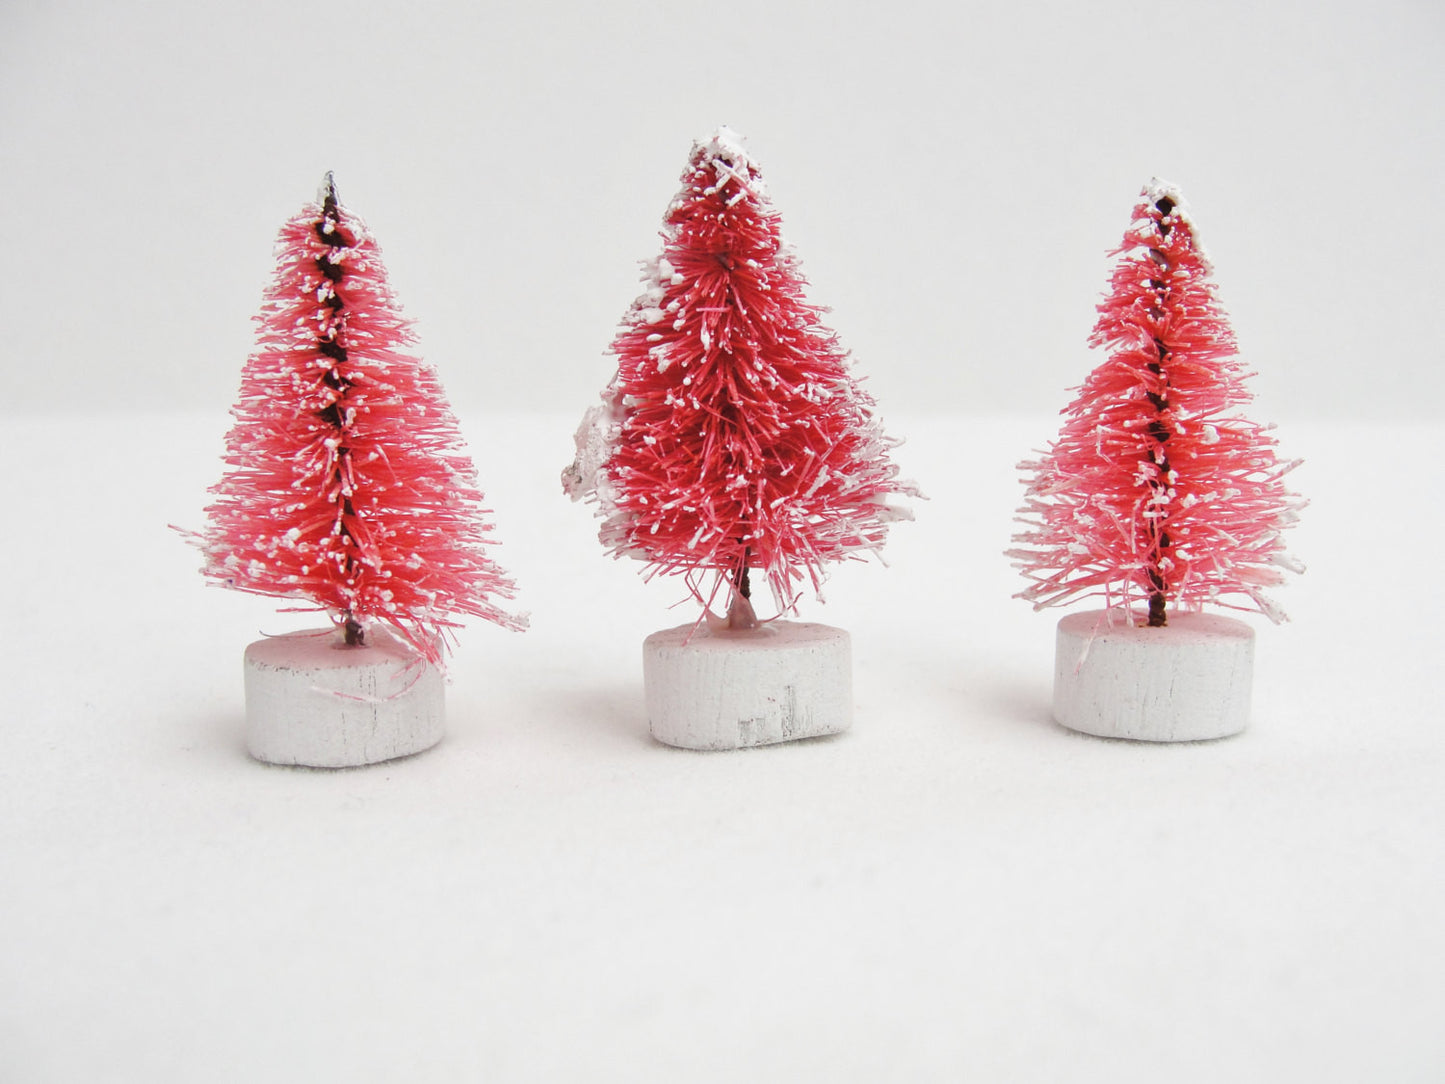 Frosted Pink bottle brush sisal trees 1.25" tall set of 3 - General Crafts - Craft Supply House